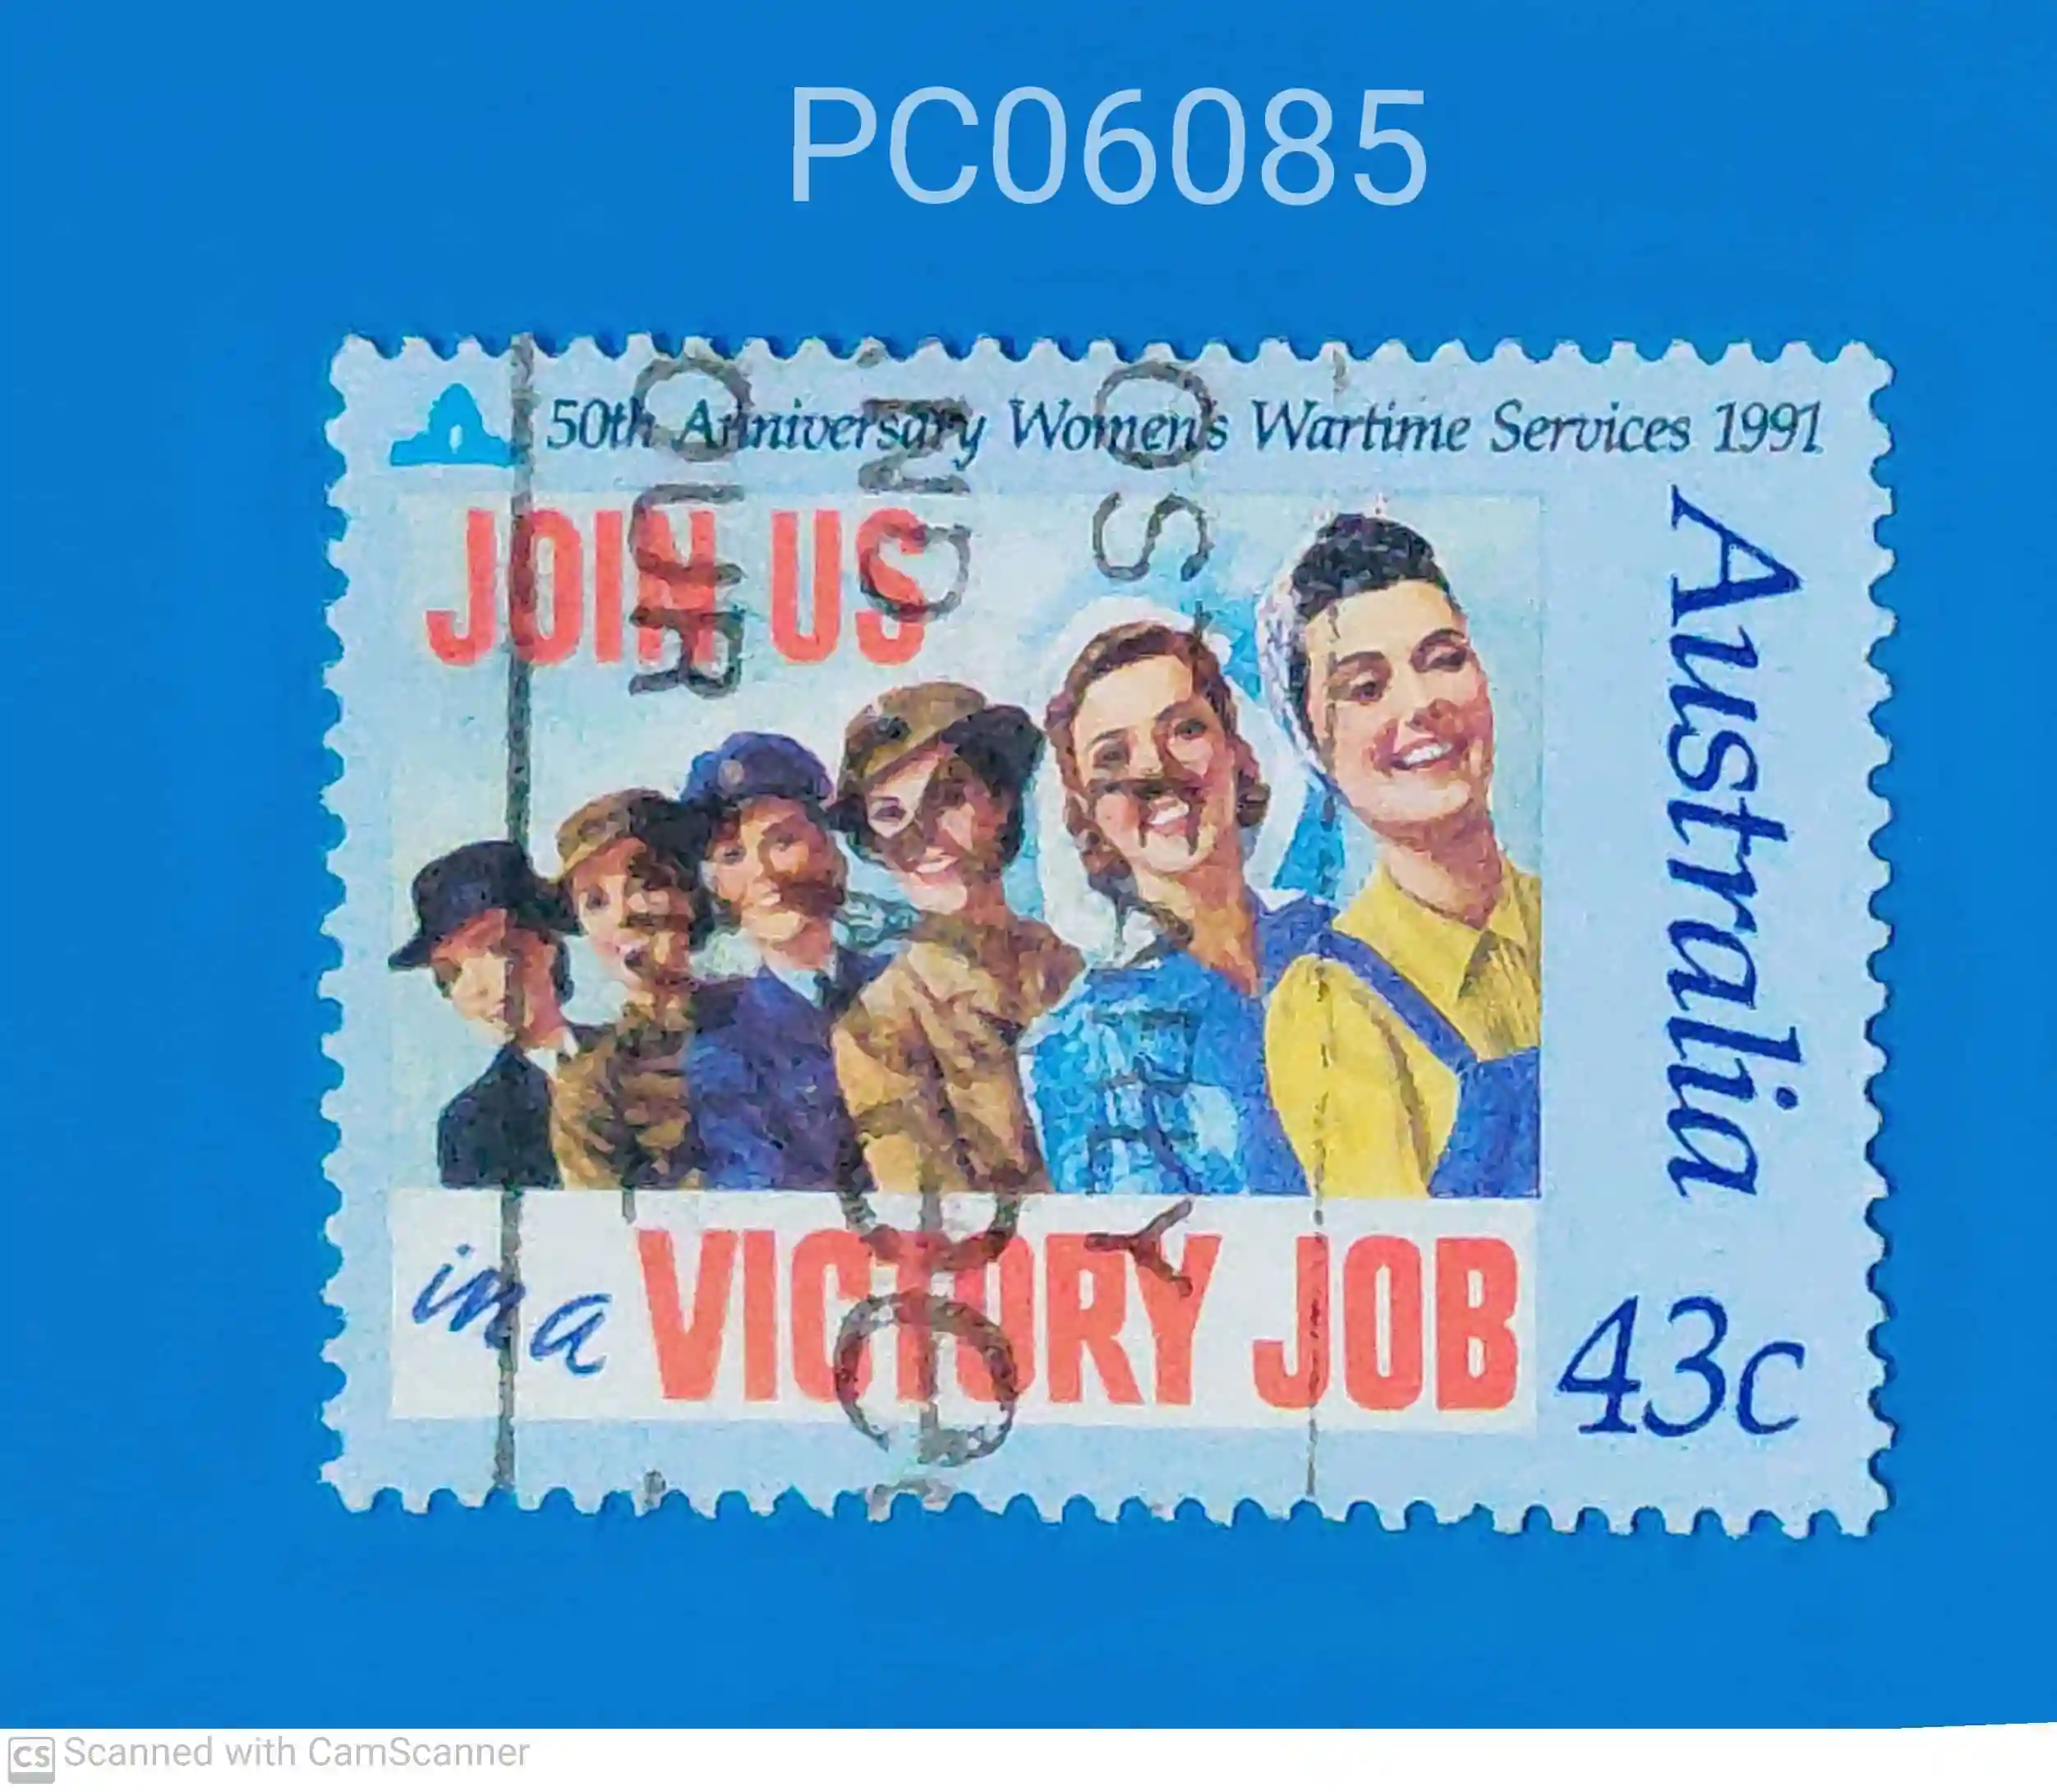 Australia 1991 commemorating the 50th Anniversary of Women's Wartime Services Used PC06085